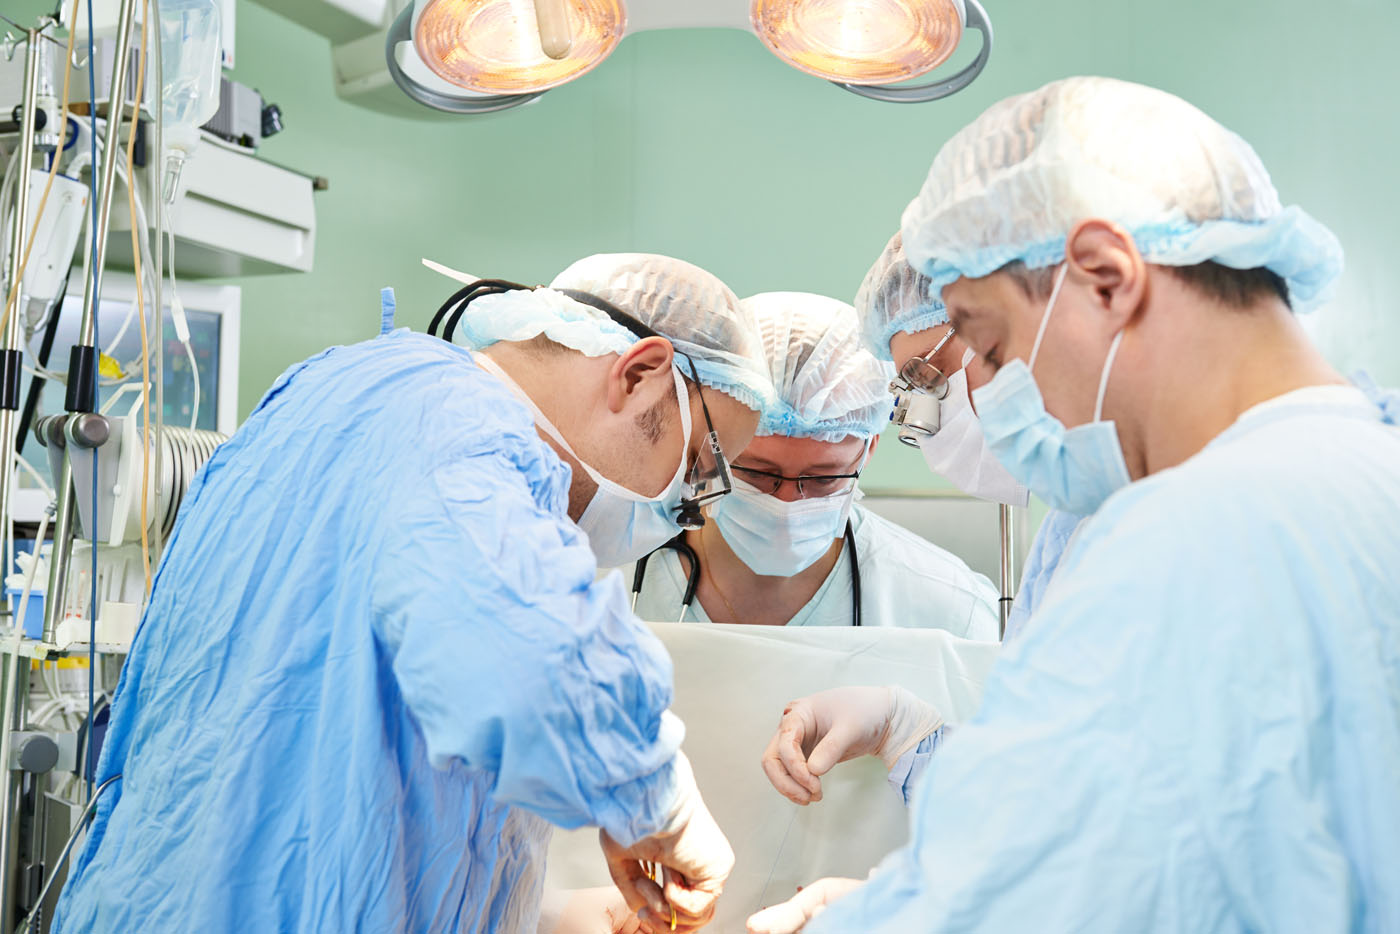 Download the OR improvement whitepaper, "The Surgeon Centered OR," by Surgical Directions.